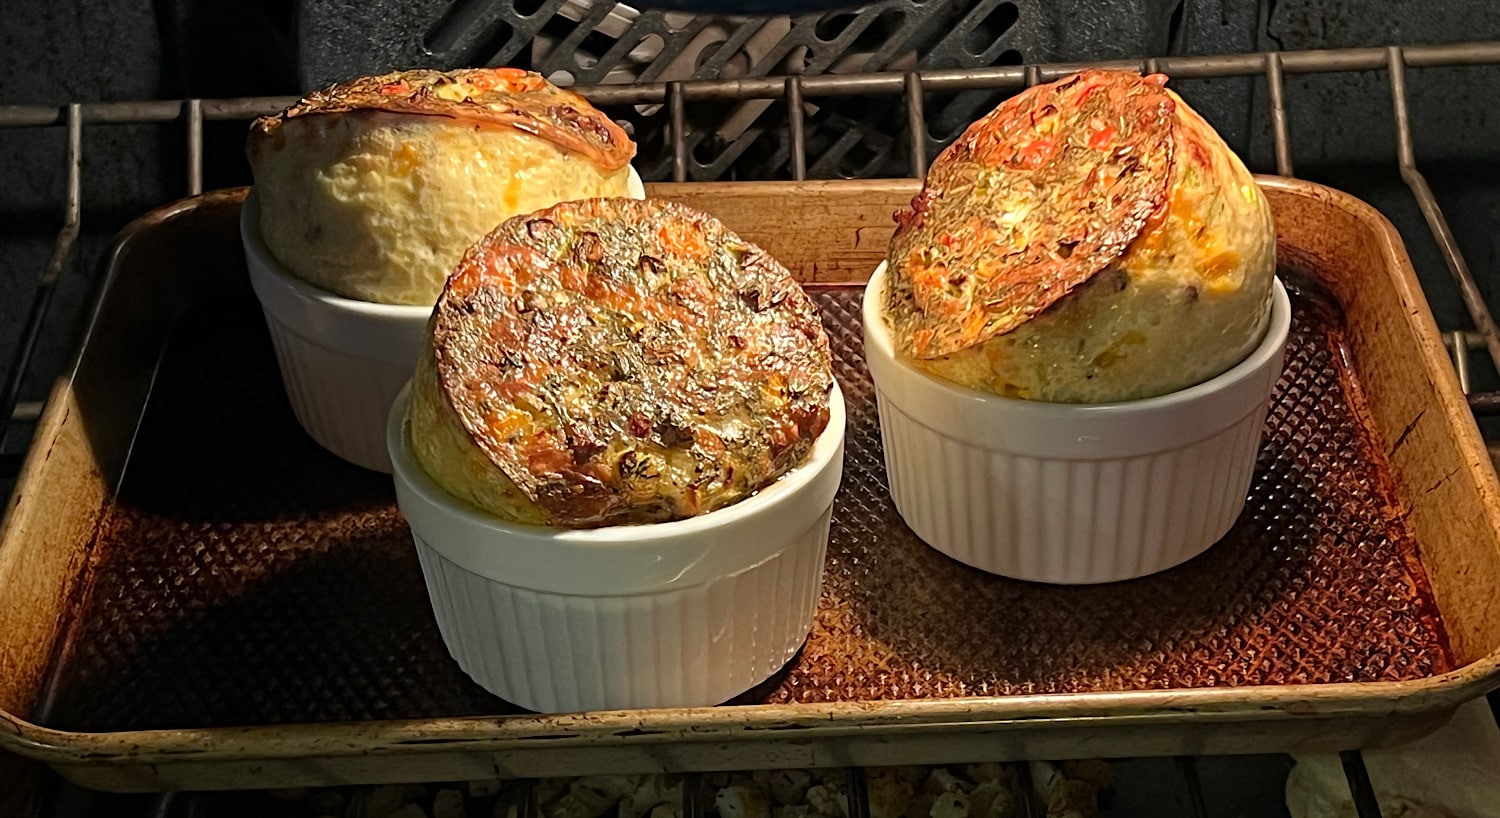 Three Egg souffle cups in oven